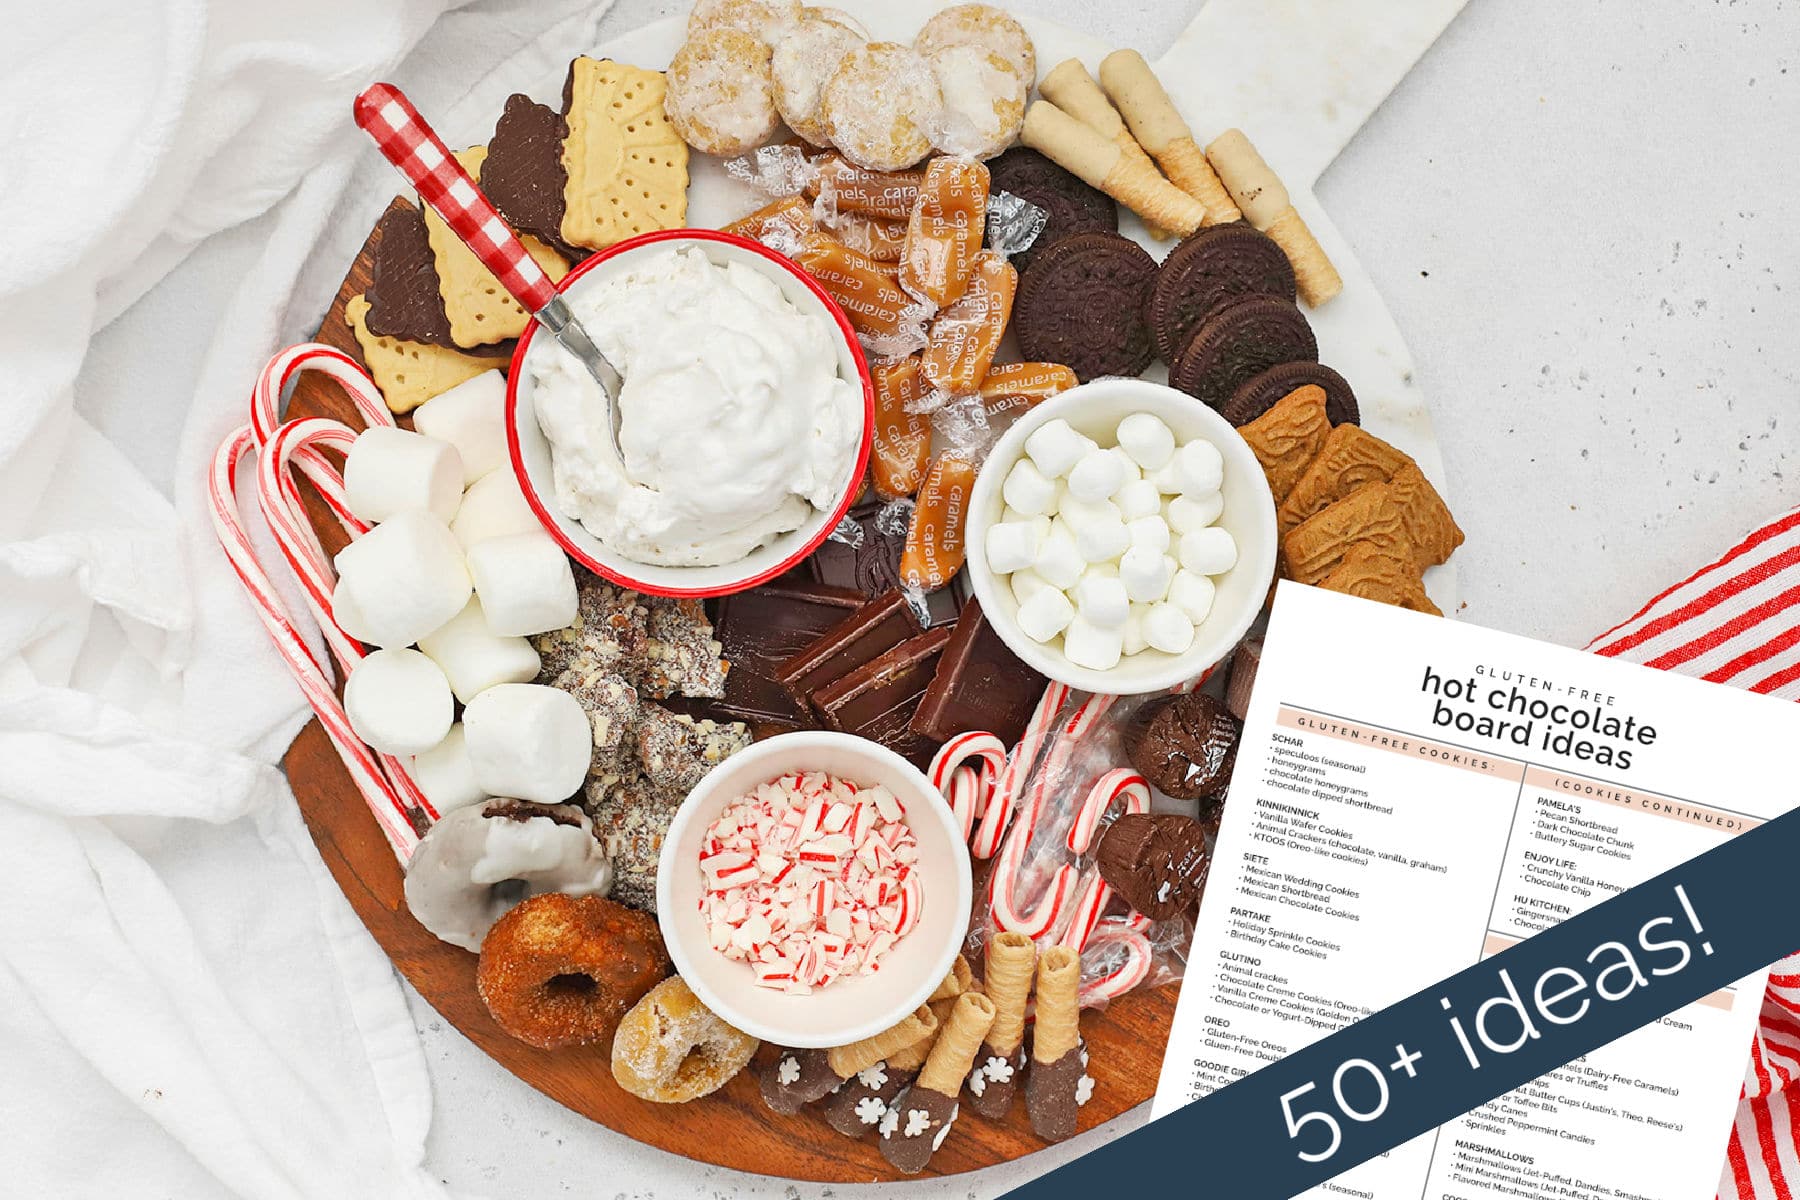 Overhead view of a gluten-free hot chocolate charcuterie board with toppings and mix-ins